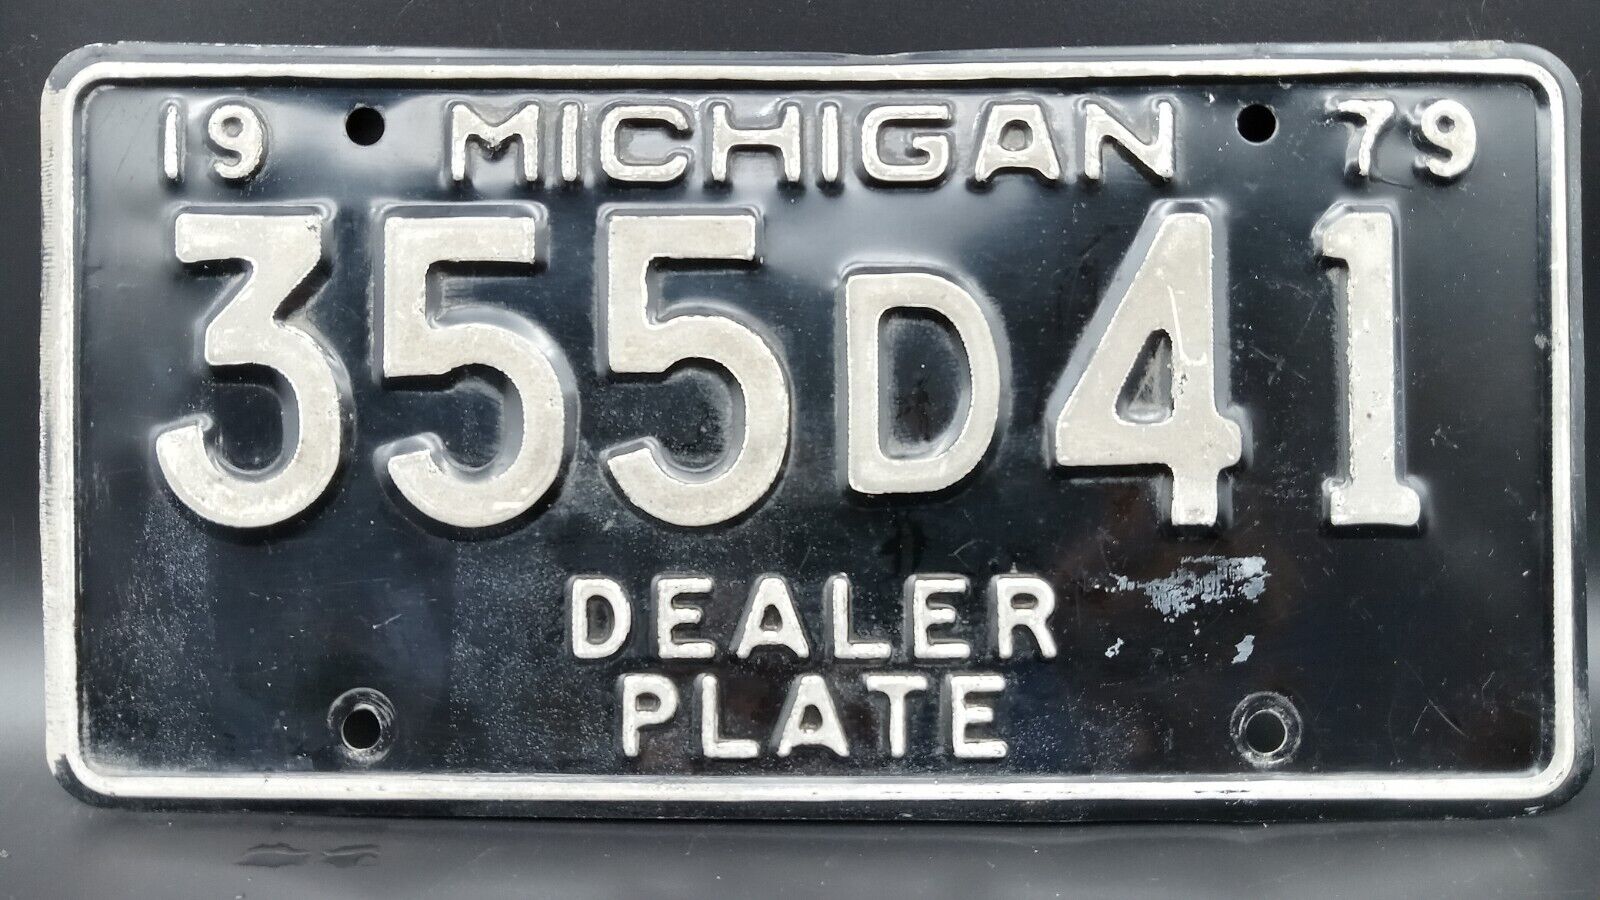 Michigan State 1979 Dealer License Plate  355D41 Black White Expired